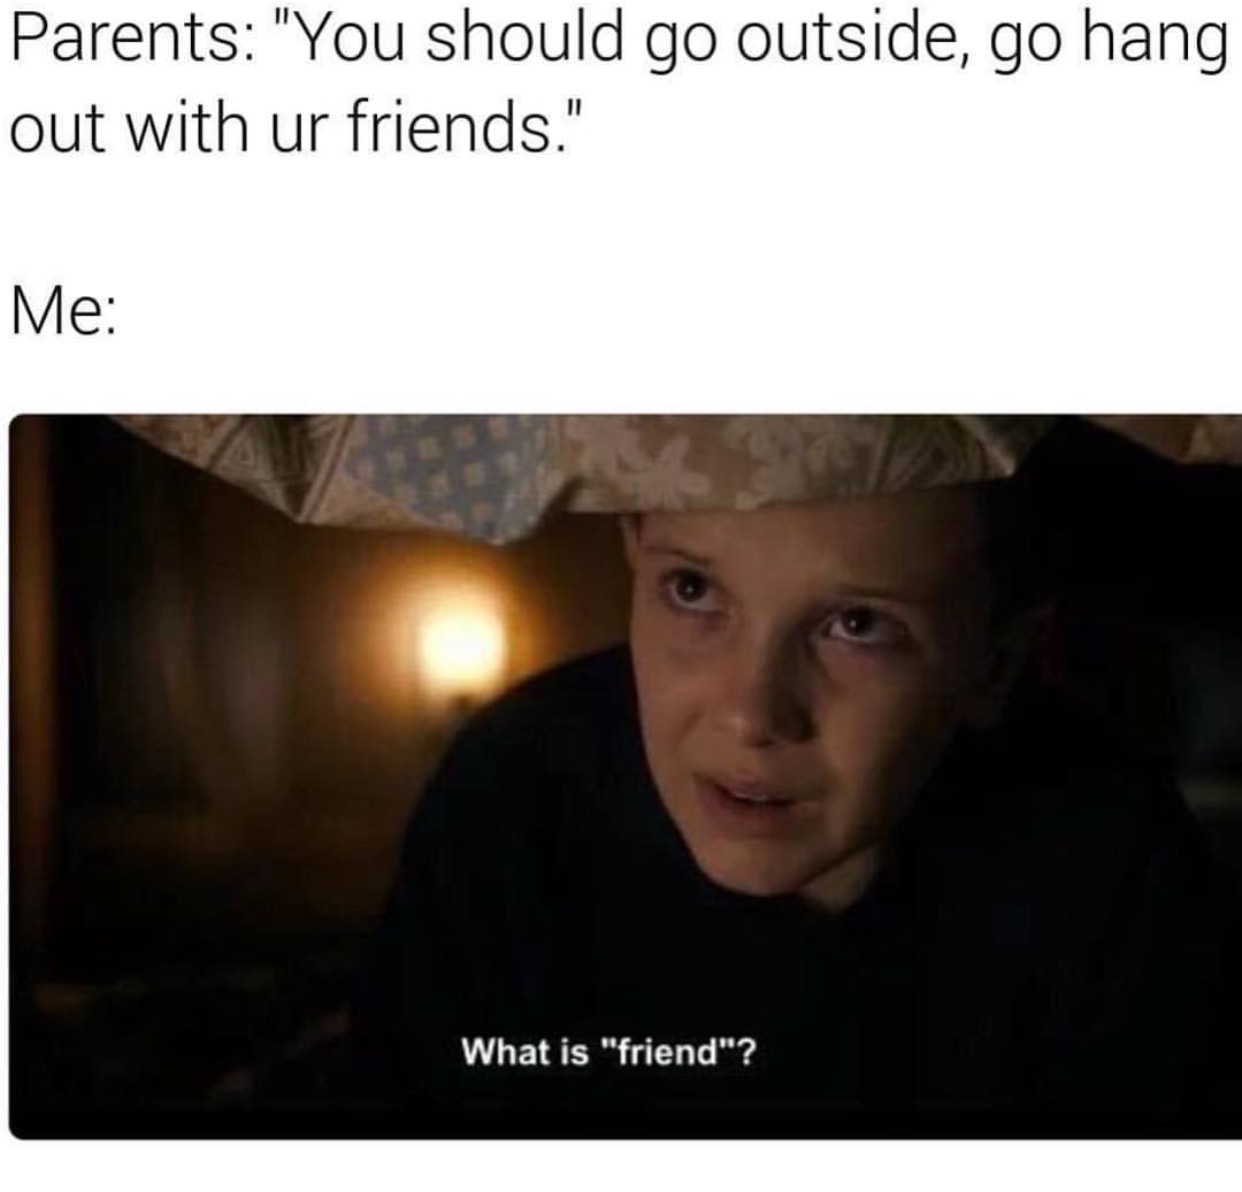 stranger things what is friend meme - Parents "You should go outside, go hang out with ur friends." Me What is "friend"?